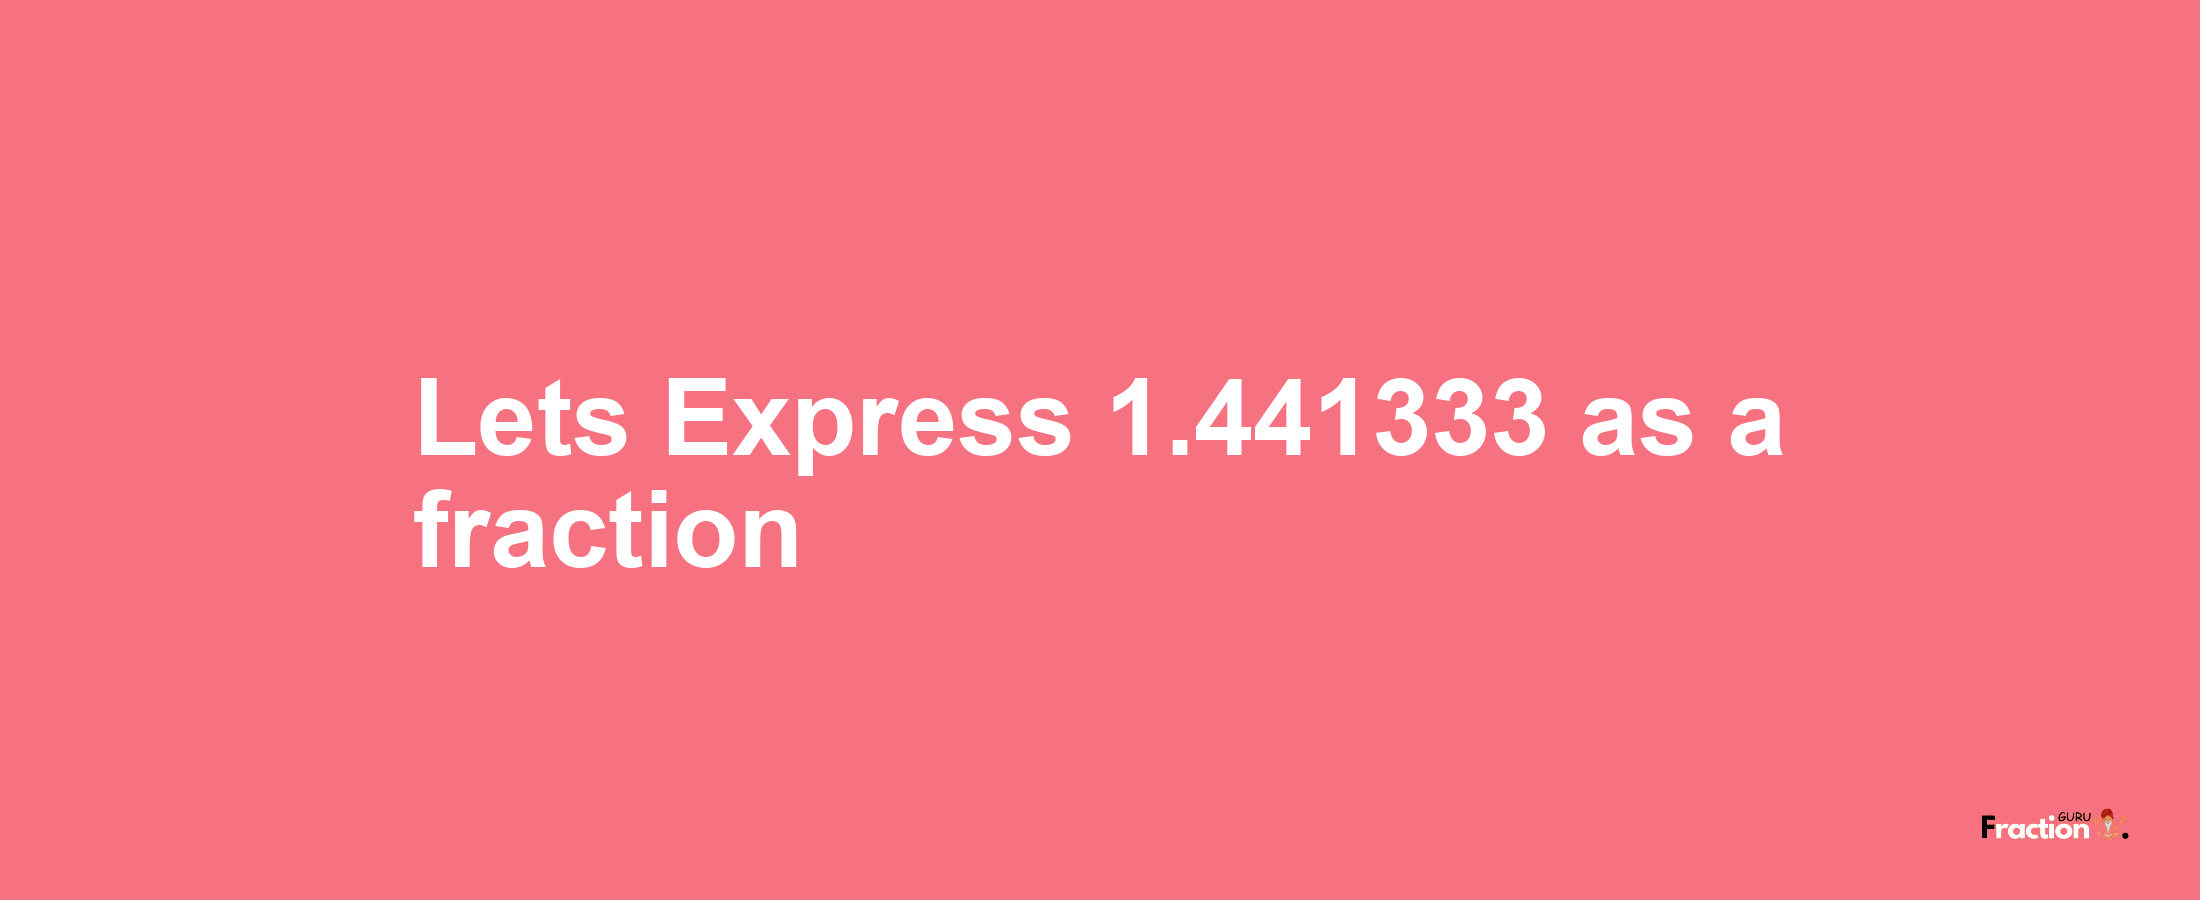 Lets Express 1.441333 as afraction